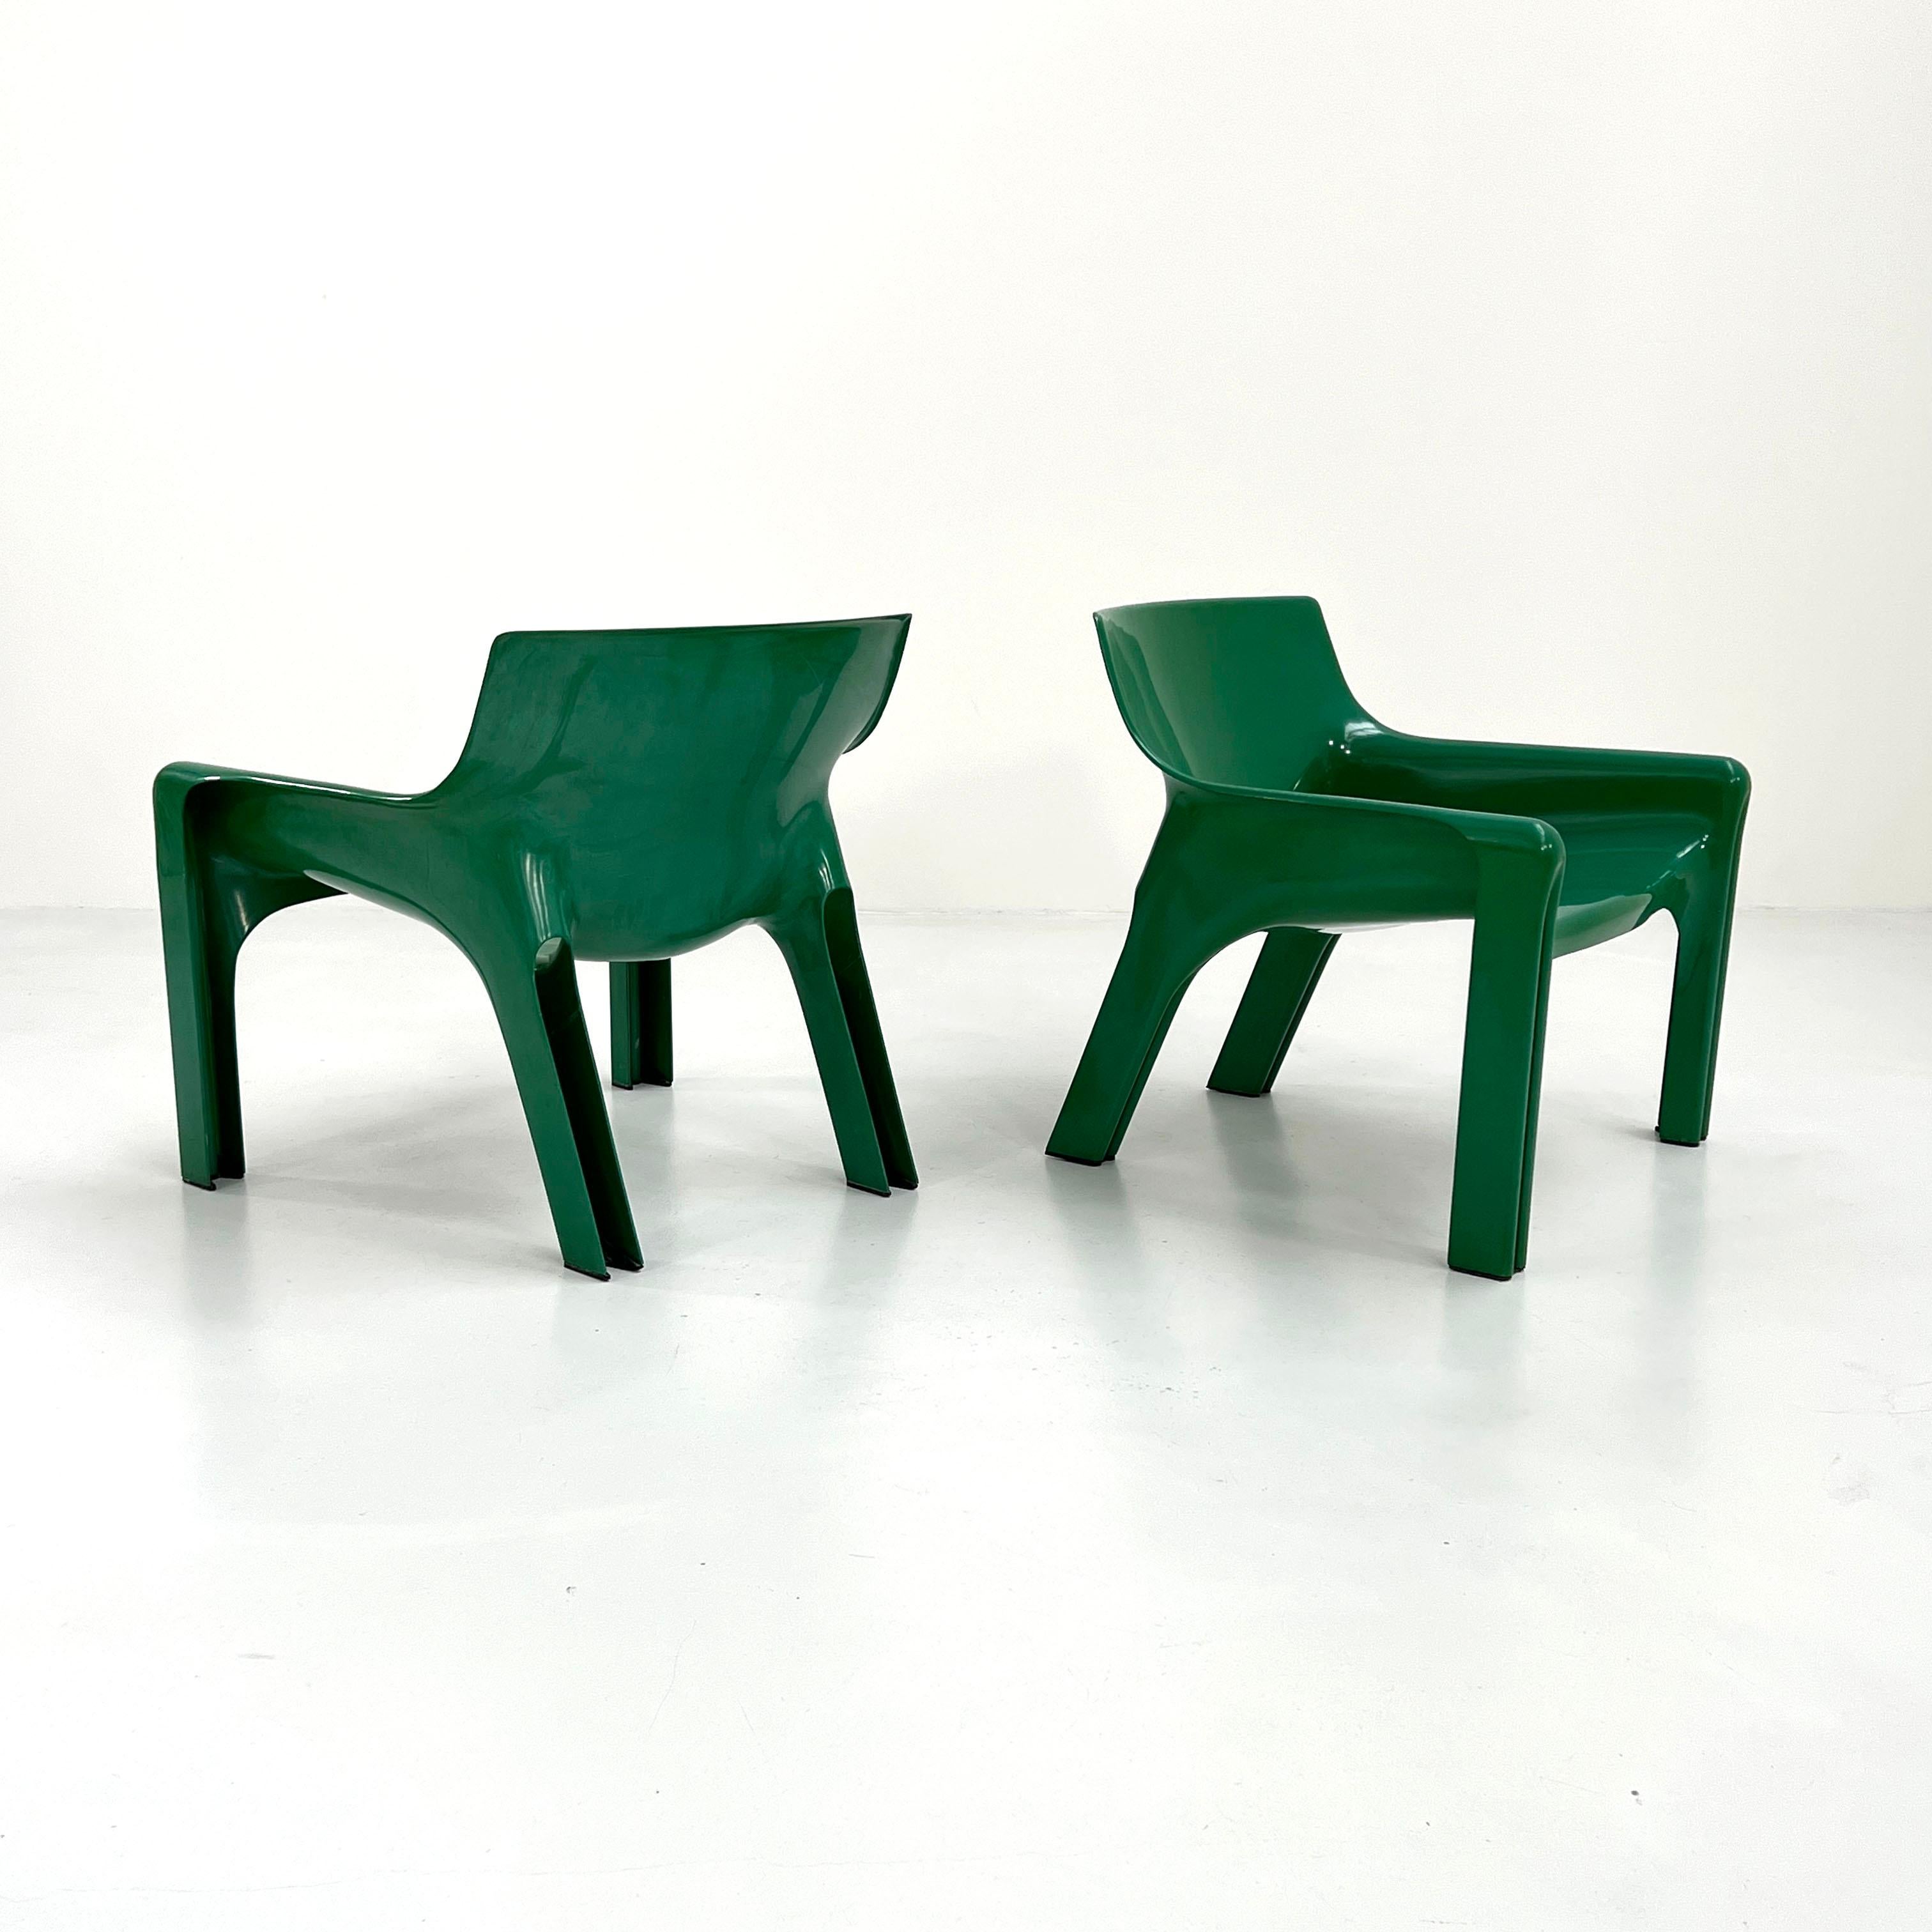 Italian Pair of Green Vicario Lounge Chair by Vico Magistretti for Artemide, 1970s